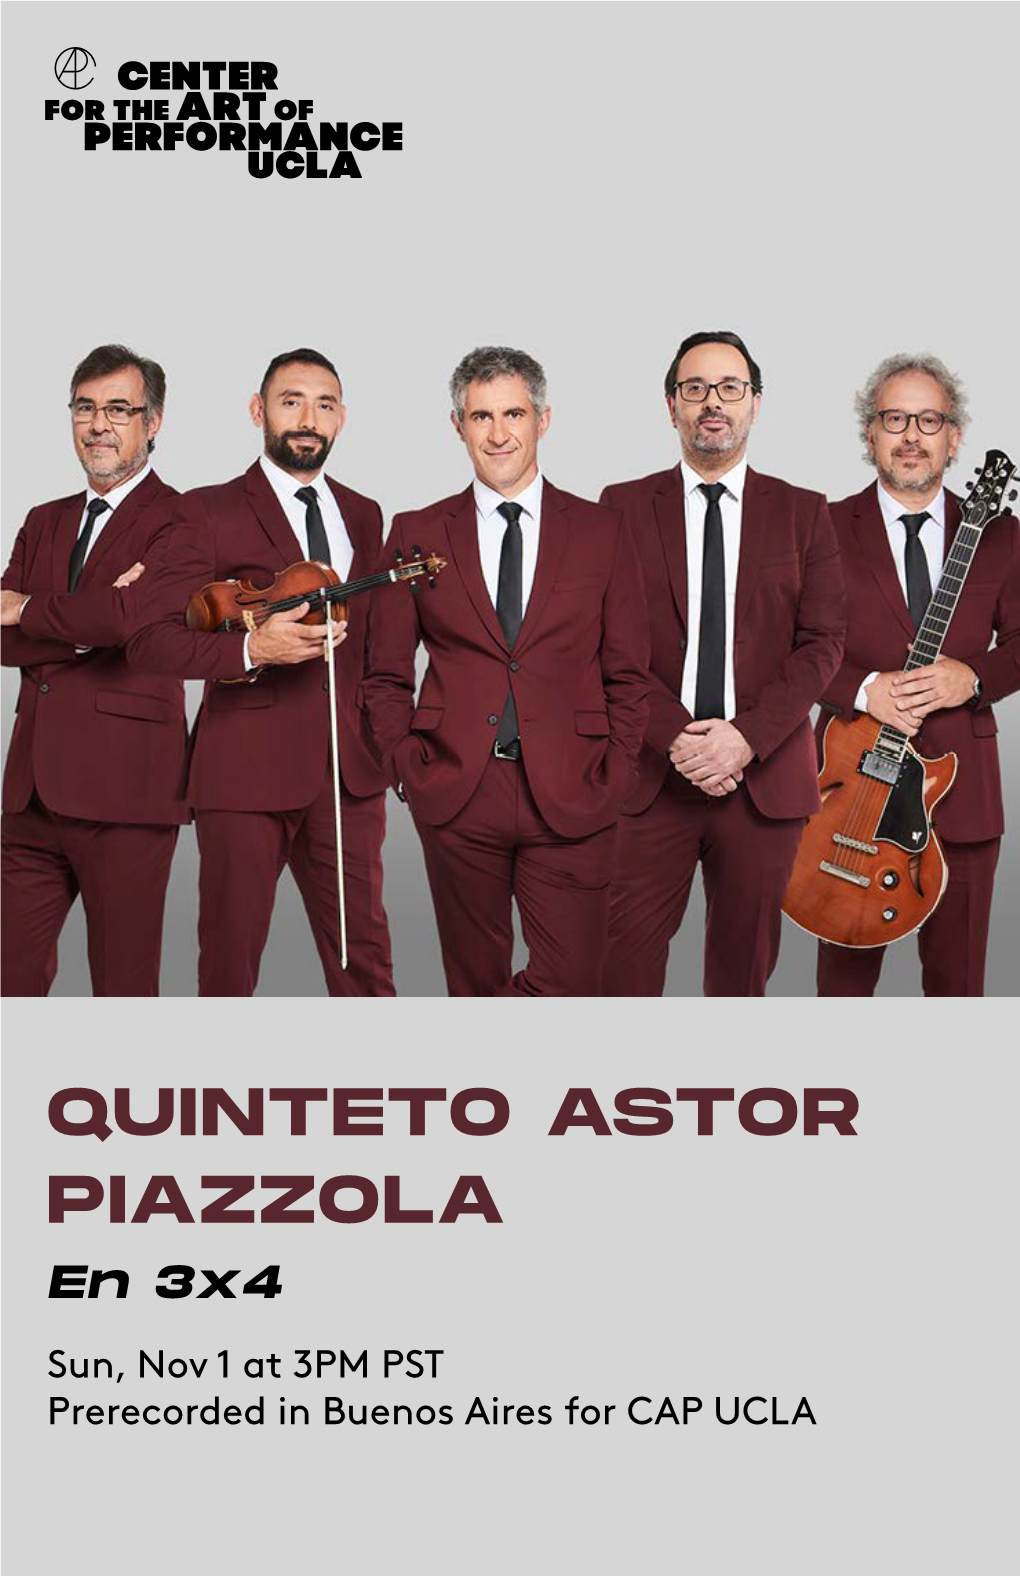 QUINTETO ASTOR PIAZZOLA En 3X4 Sun, Nov 1 at 3PM PST Prerecorded in Buenos Aires for CAP UCLA ART MATTERS NOW MORE THAN EVER